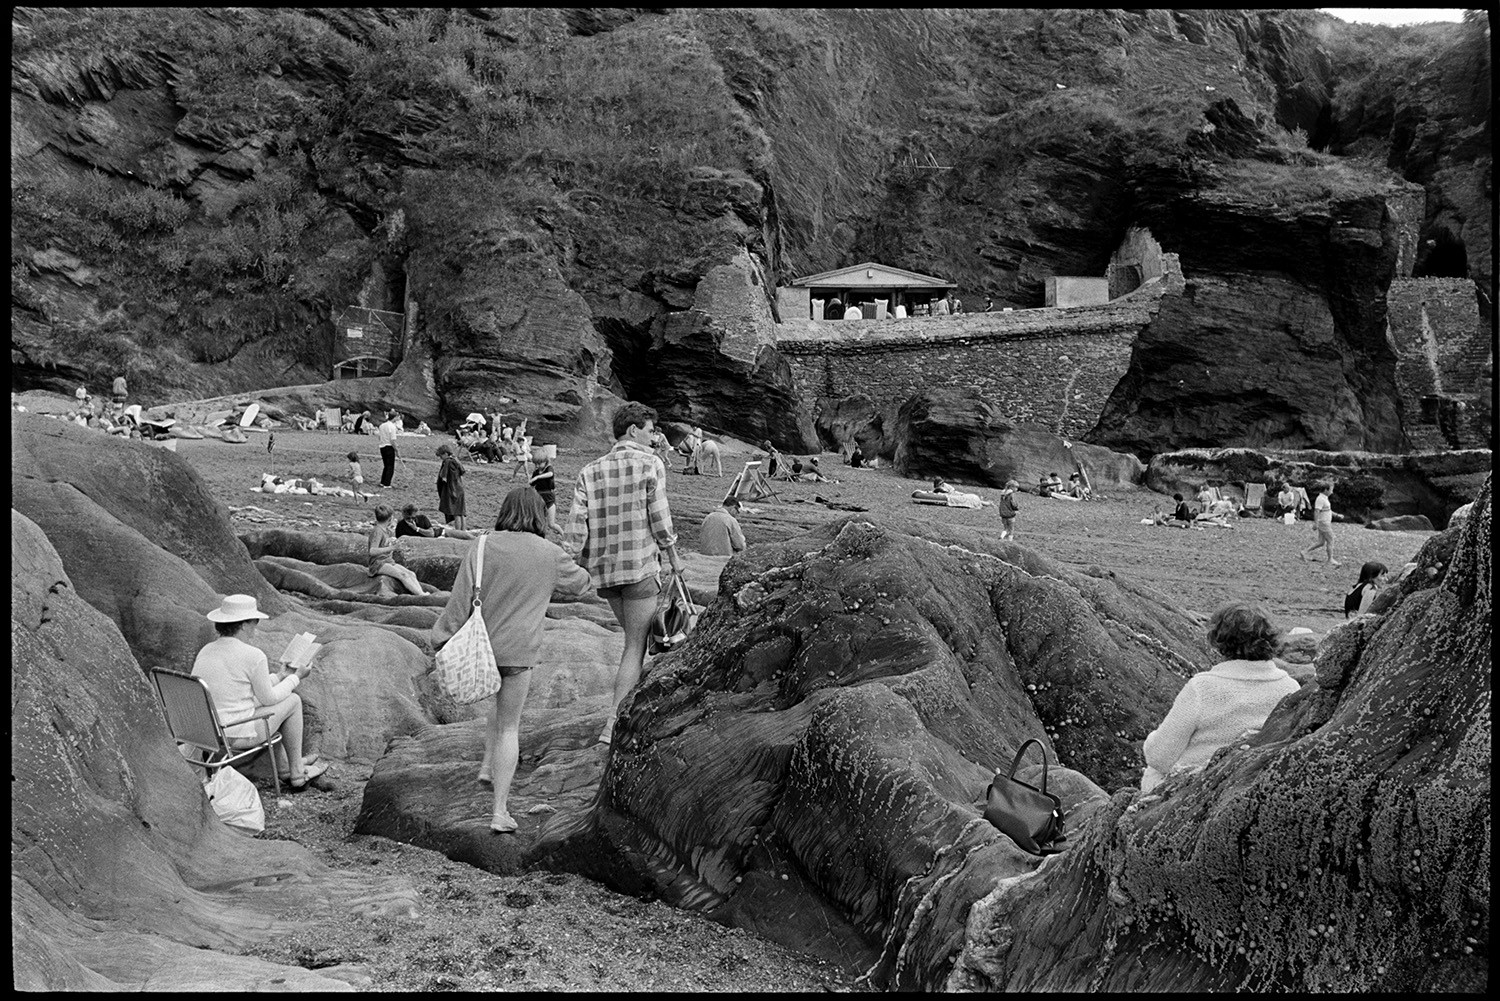 Entrance to tunnel and rocky beach with shop. People climbing on rocks. Boats. 
[A man and woman walking along rocks at Ilfracombe beach. Two people are sat by the rocks at the bottom of the cliff in the foreground. More people can be seen sitting and sun bathing on the beach and a hut selling beach goods is visible in the background.]